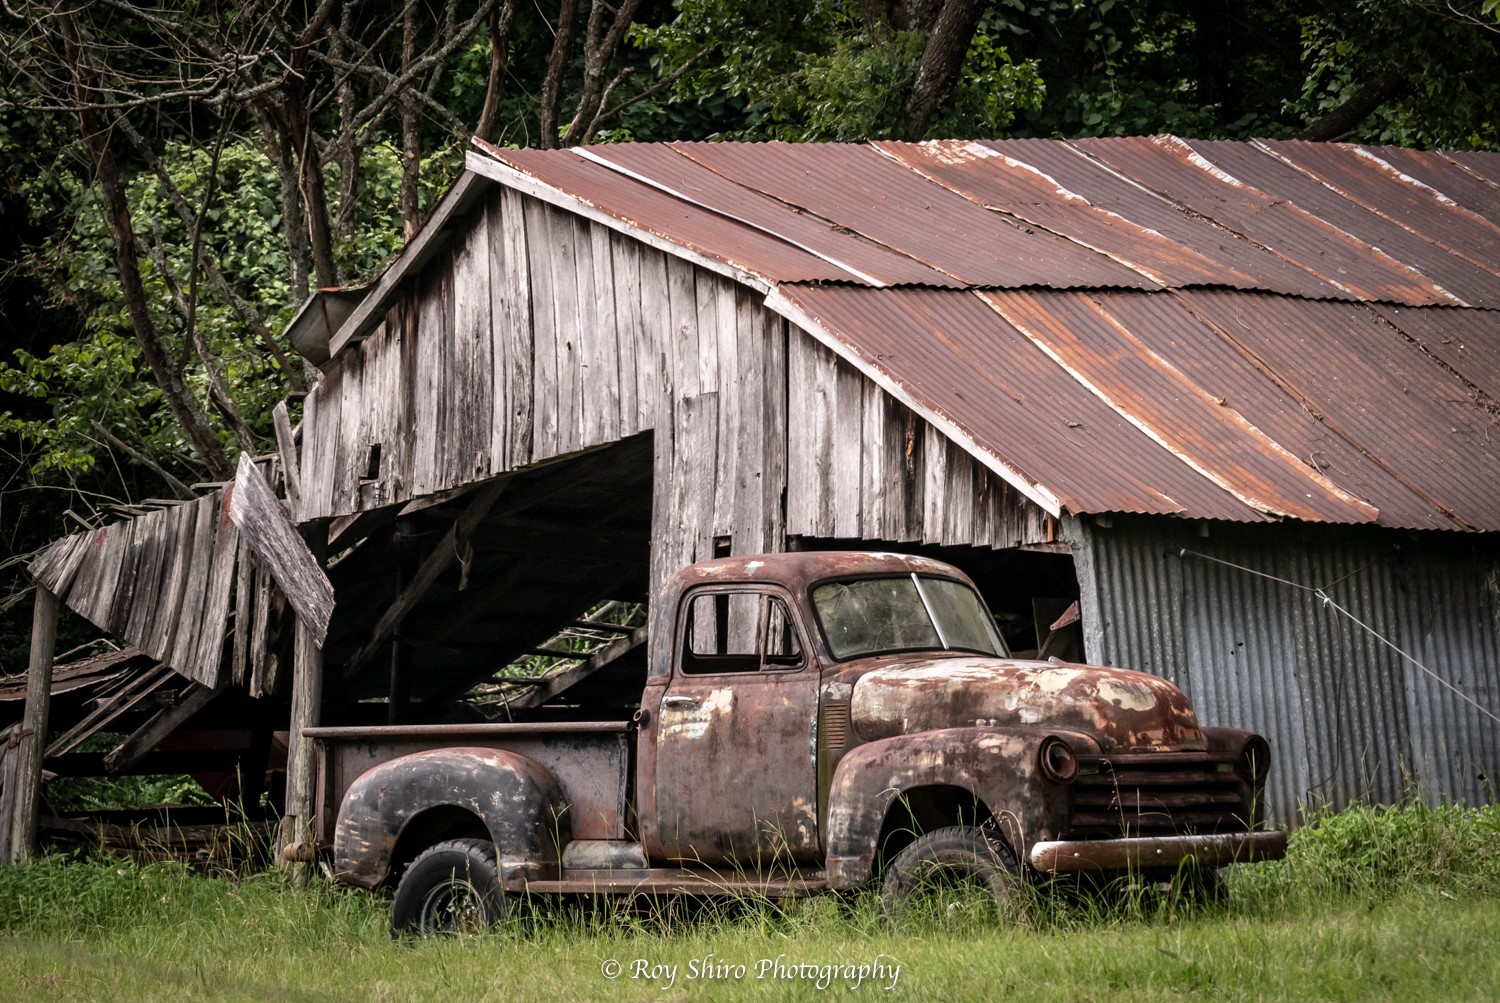 Rustic barn and rusty antique truck in a green pasture